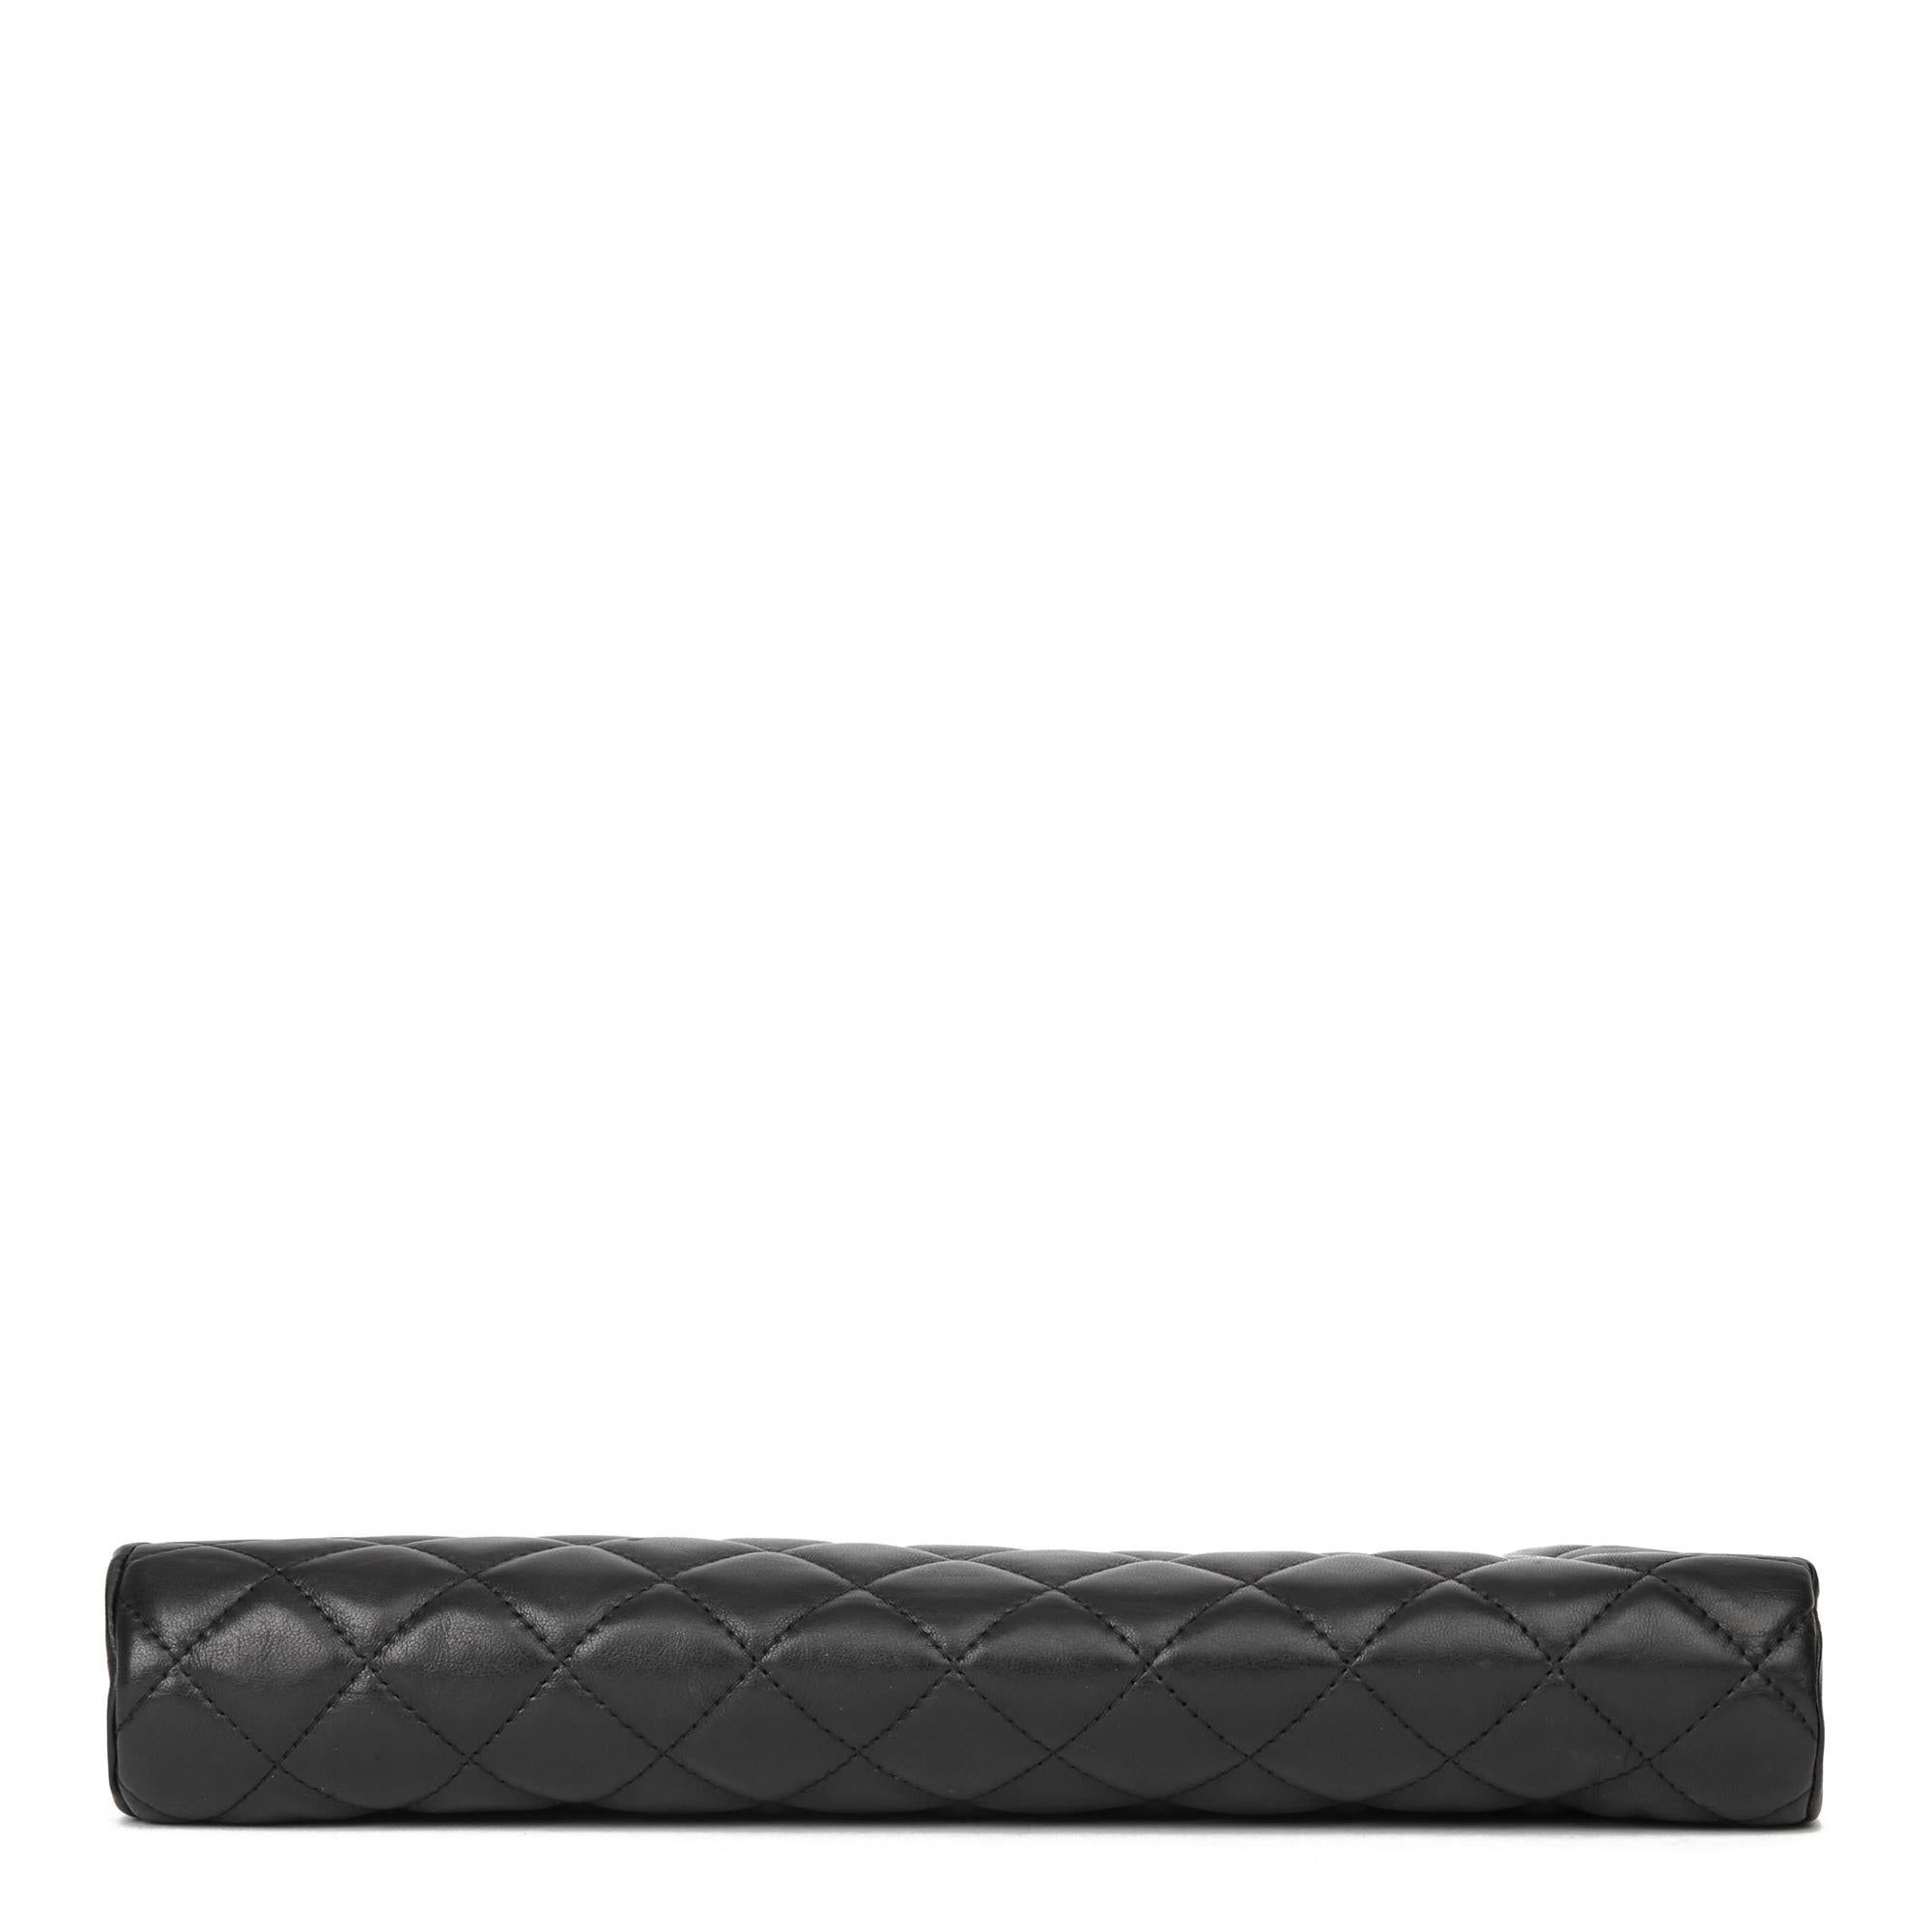 2006 Chanel Black Quilted Lambskin Timeless Clutch Bag  2